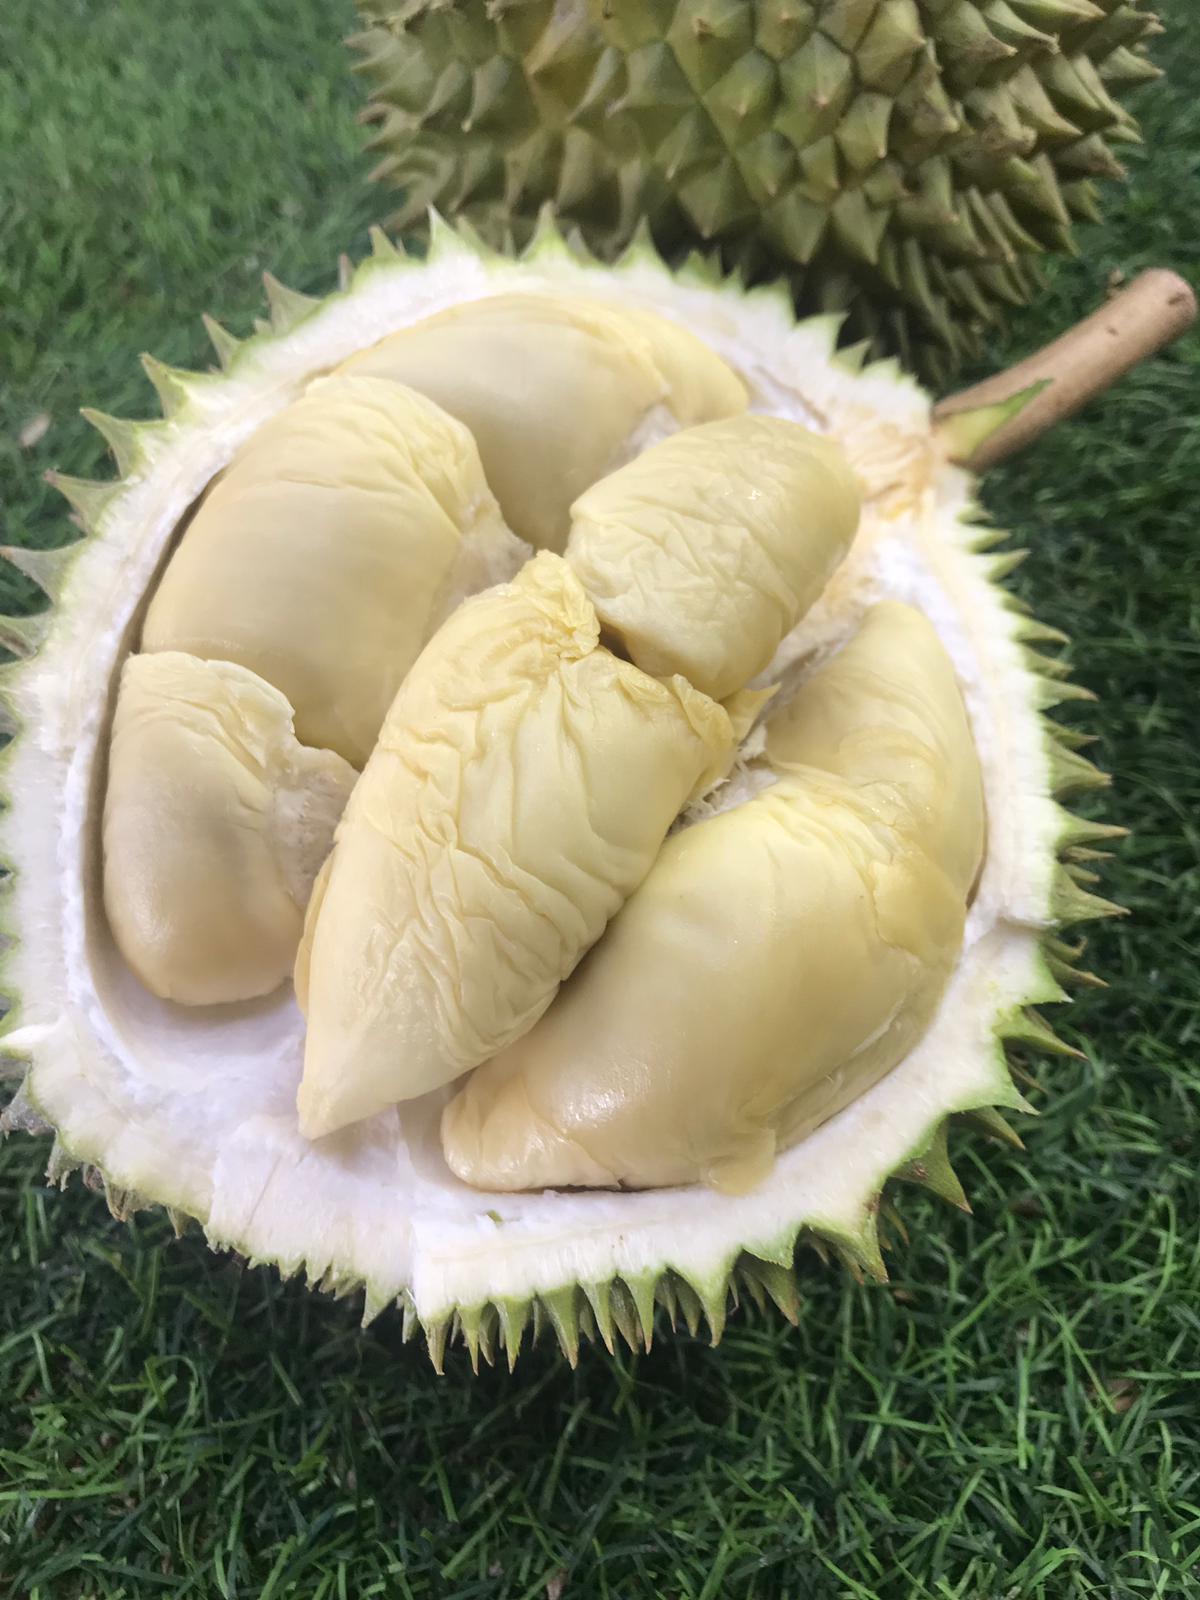 Durian Price Singapore 2 | Durian Express Delivery